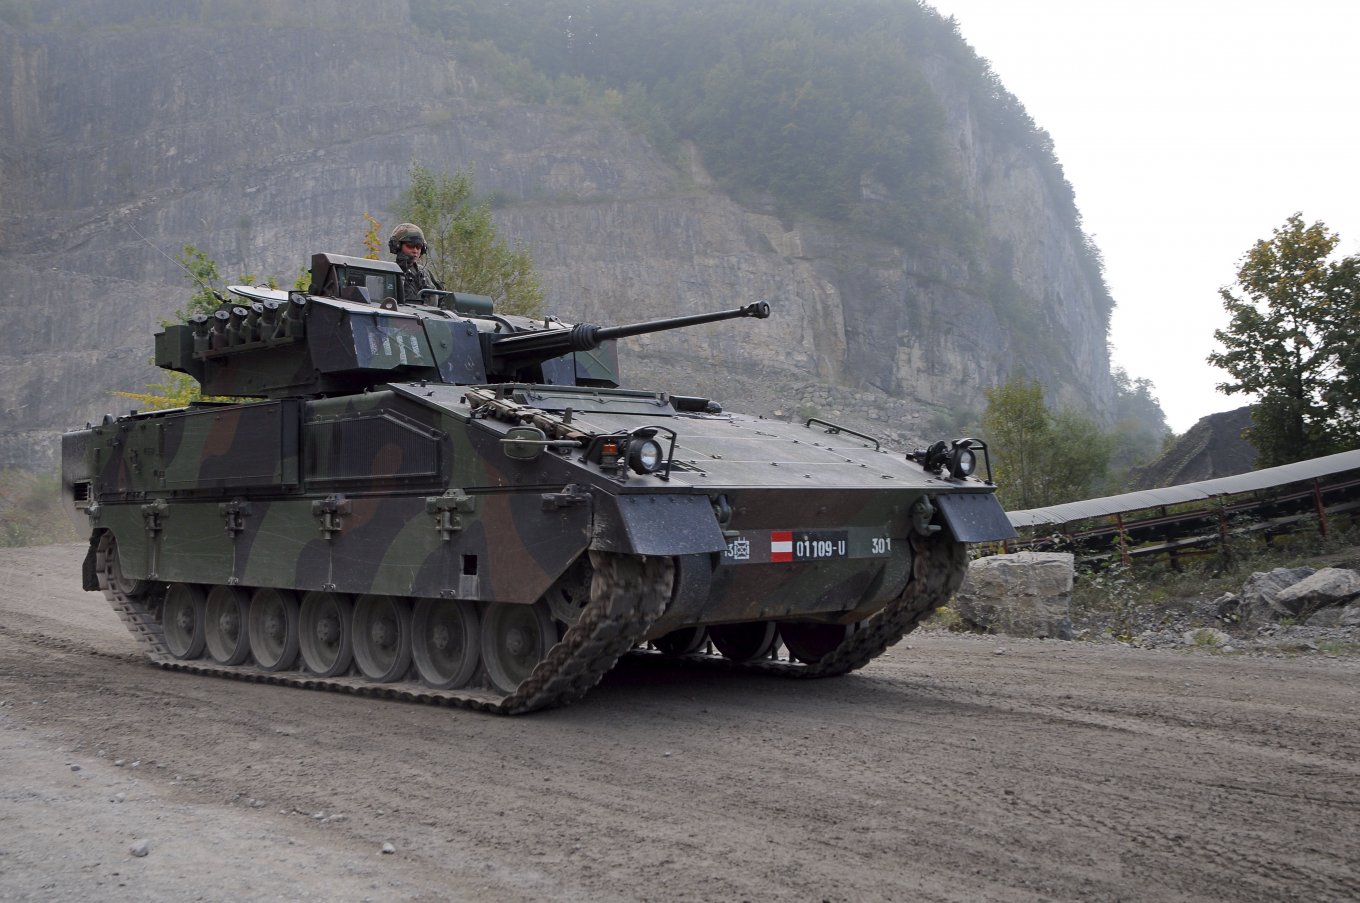 Ulan tracked armored fighting vehicle (a.k.a. ASCOD) of the Austrian Army